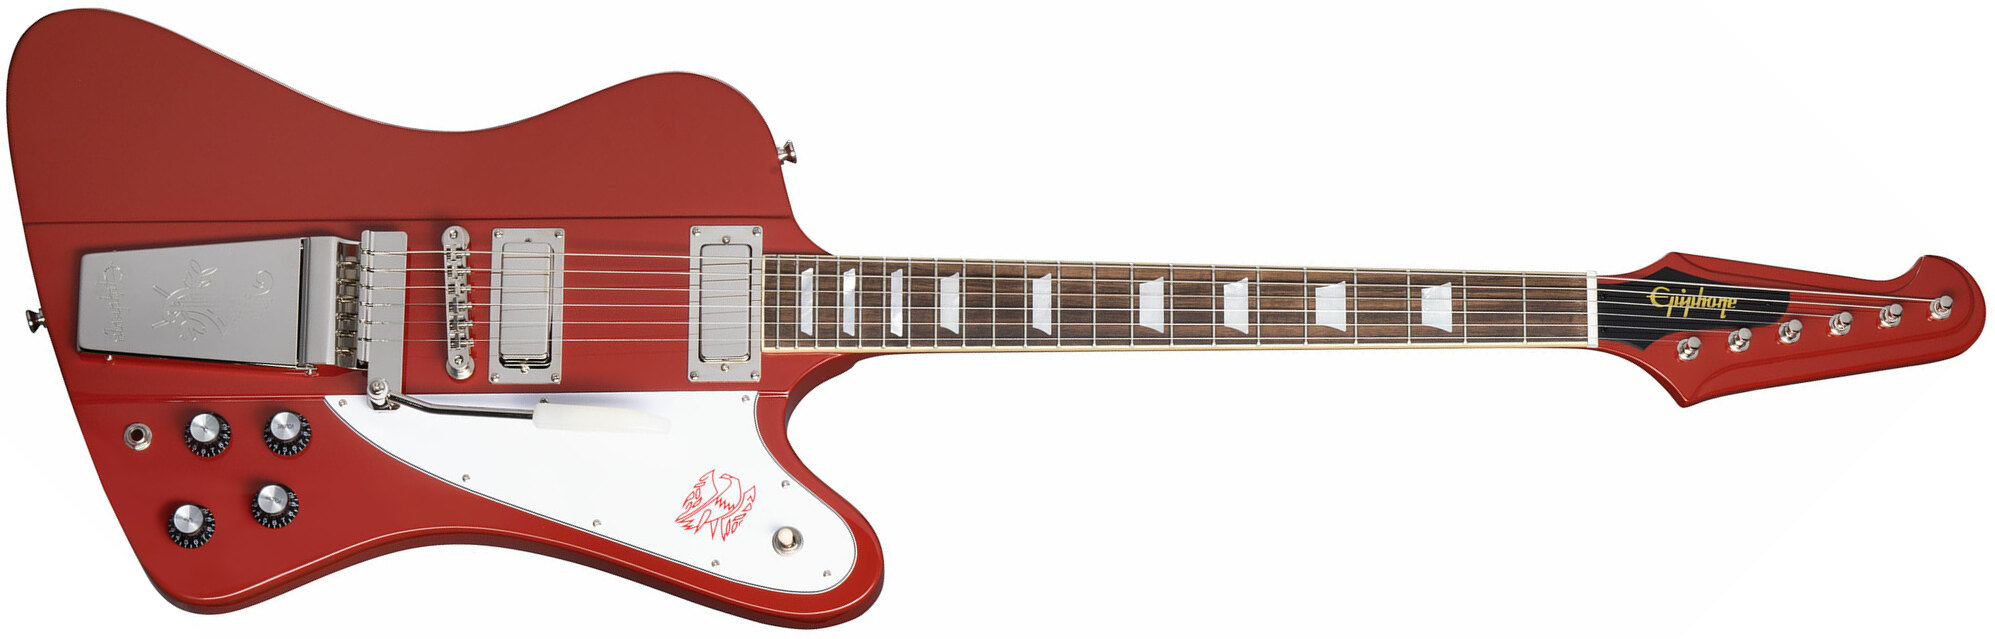 Epiphone Firebird V 1963 Maestro Vibrola Inspired By Gibson Custom 2mh Trem Lau - Ember Red - Retro rock electric guitar - Main picture